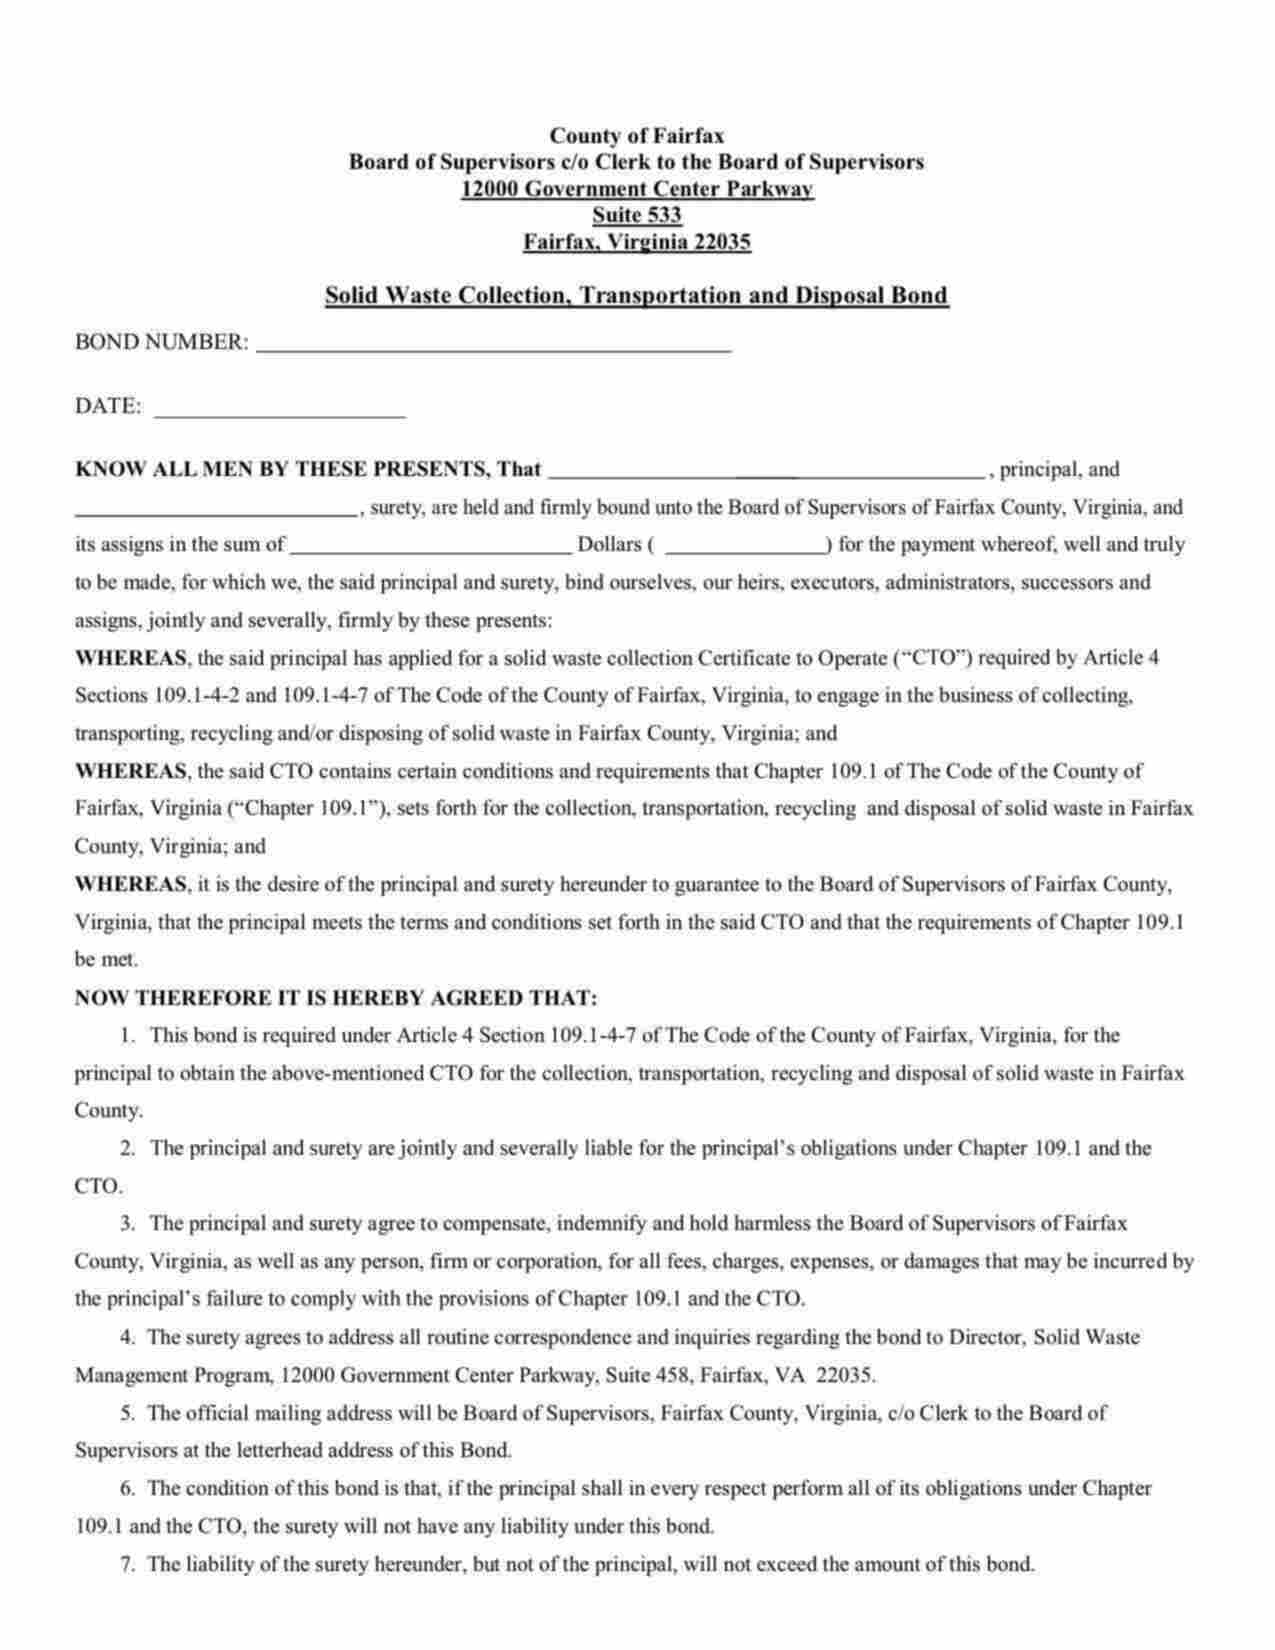 Virginia Solid Waste Collection, Transportation and Disposal Bond Form